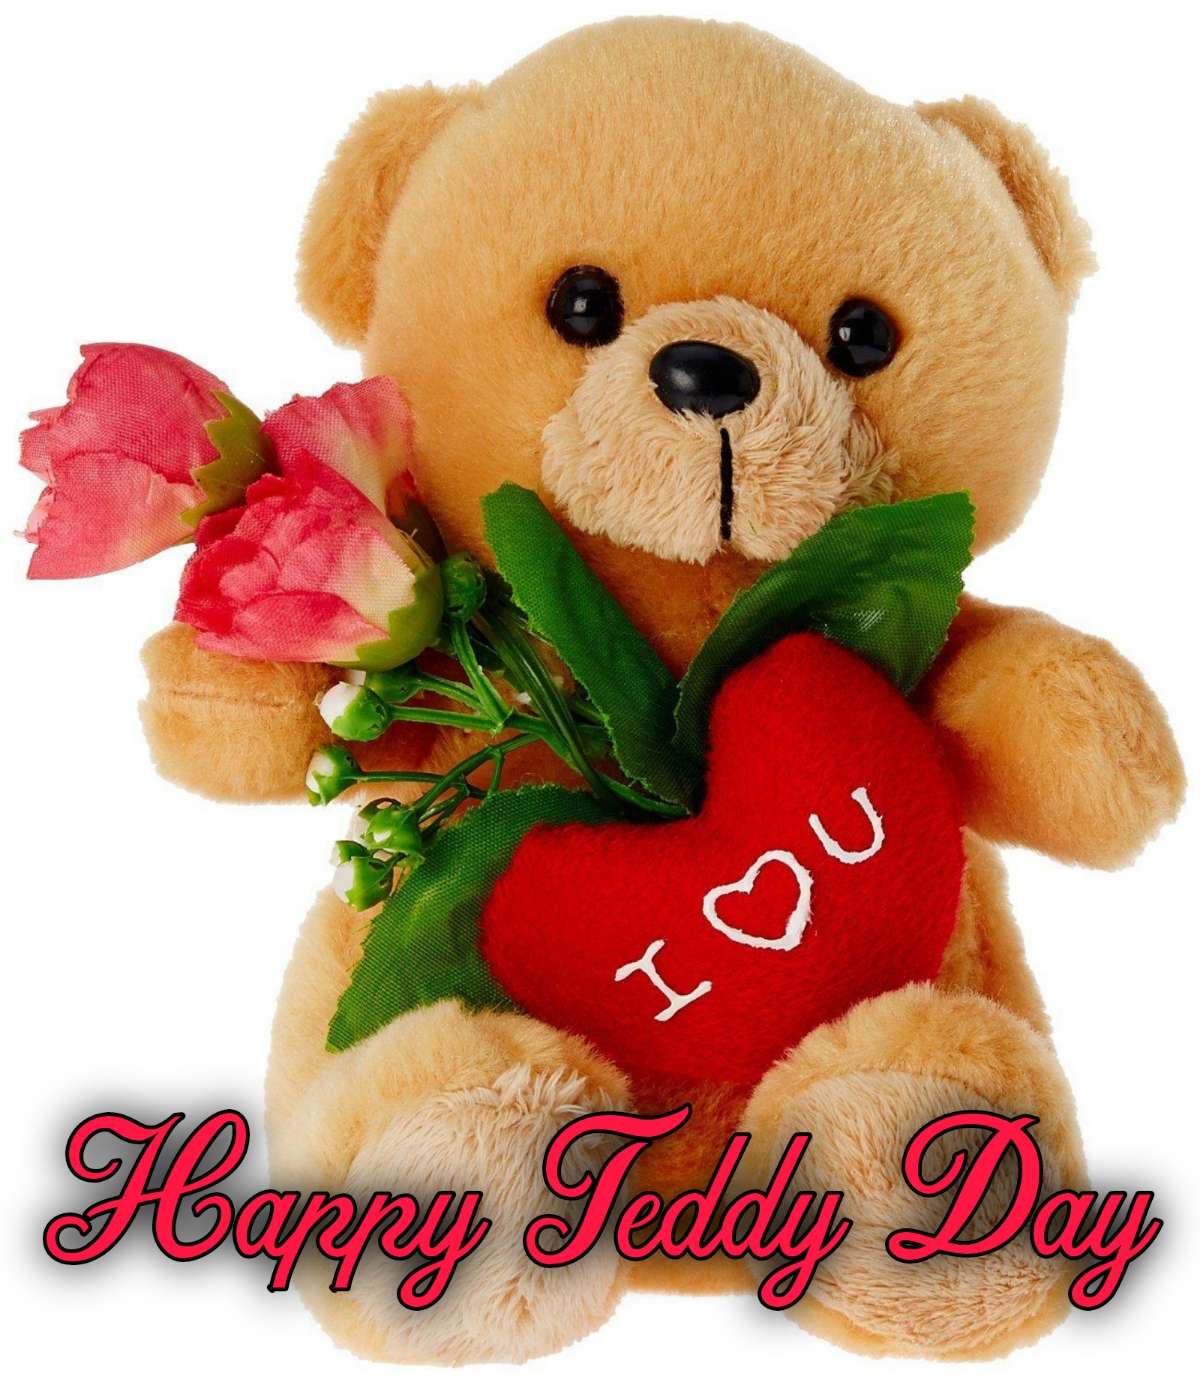 Happy Teddy Day Picture Download